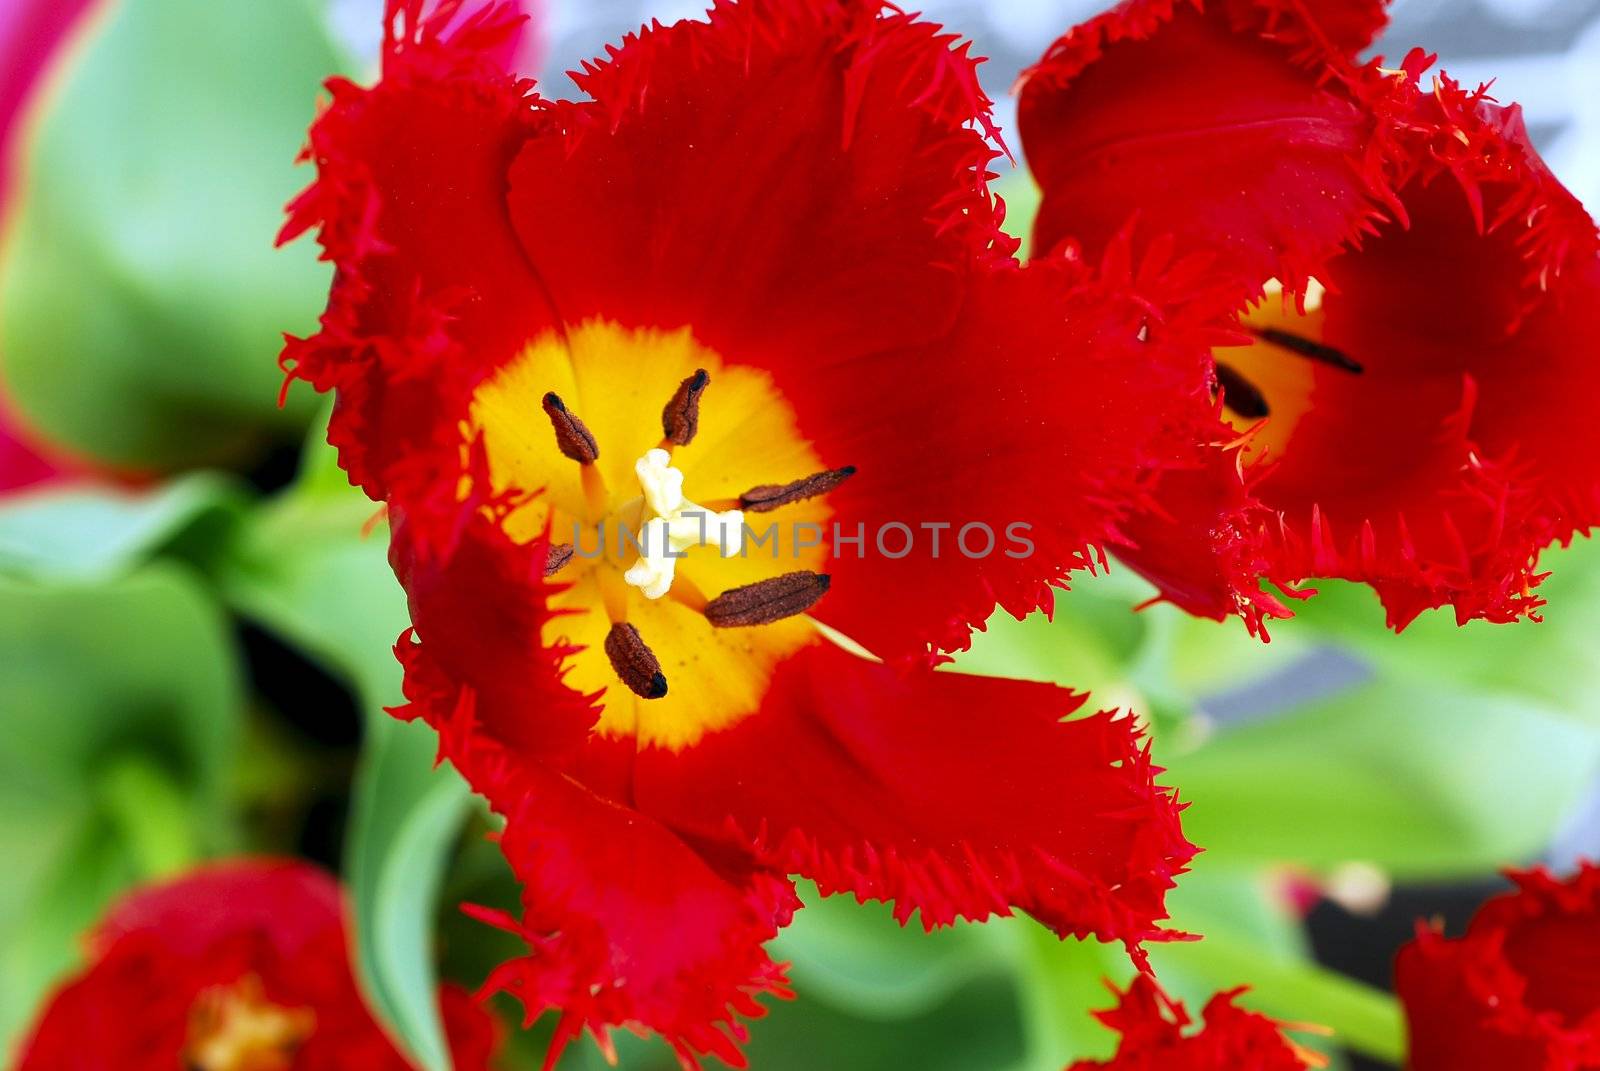 An isolated shot of a red tulip flower